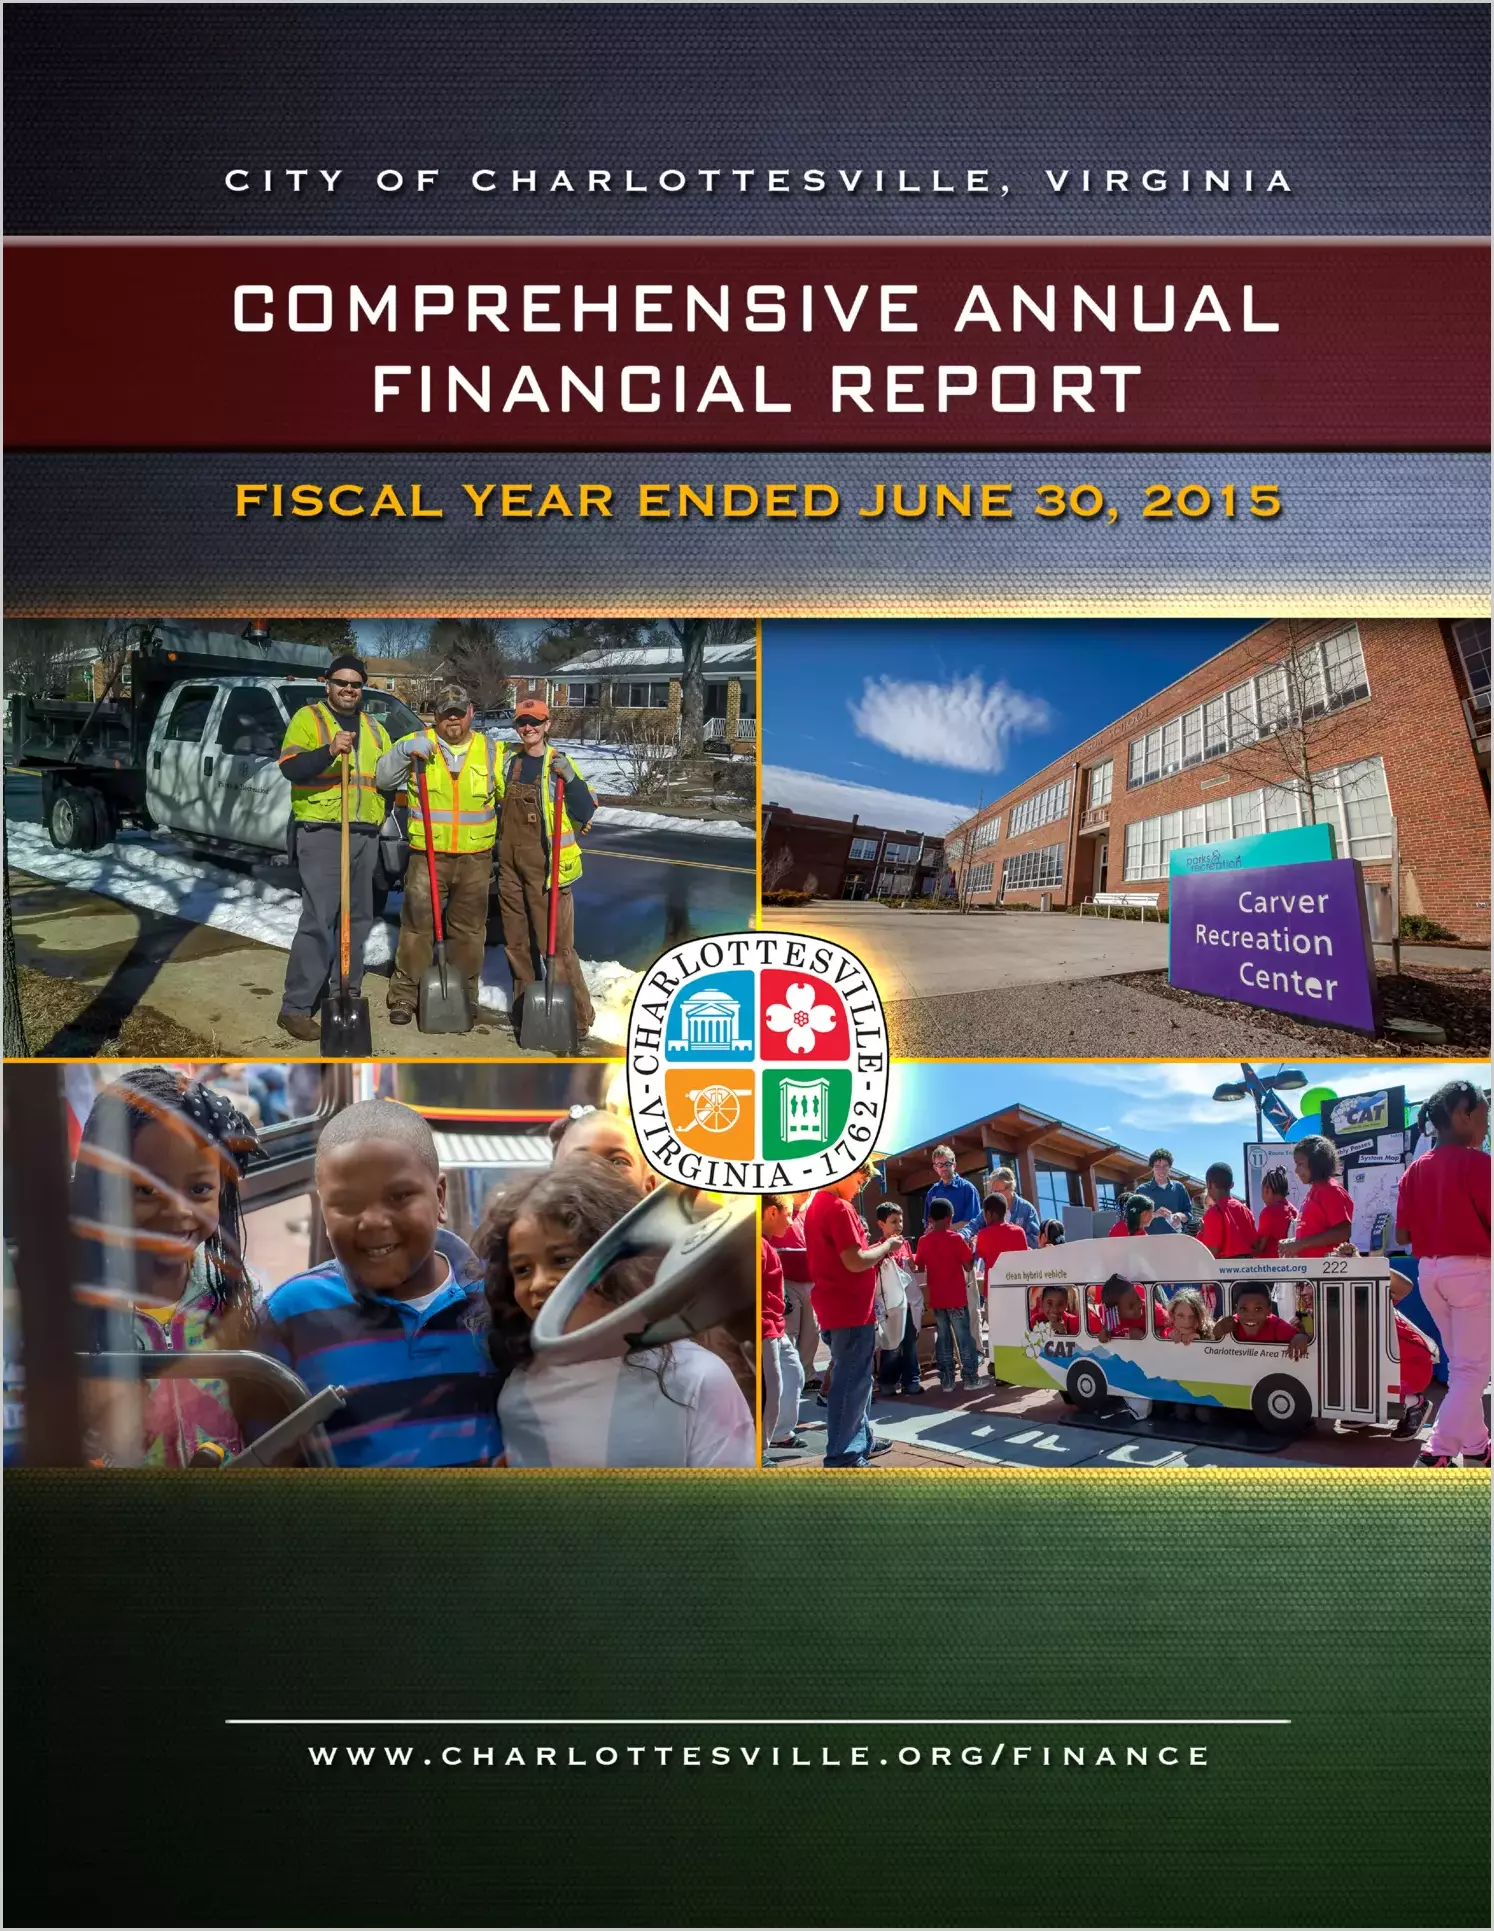 2015 Annual Financial Report for City of Charlottesville